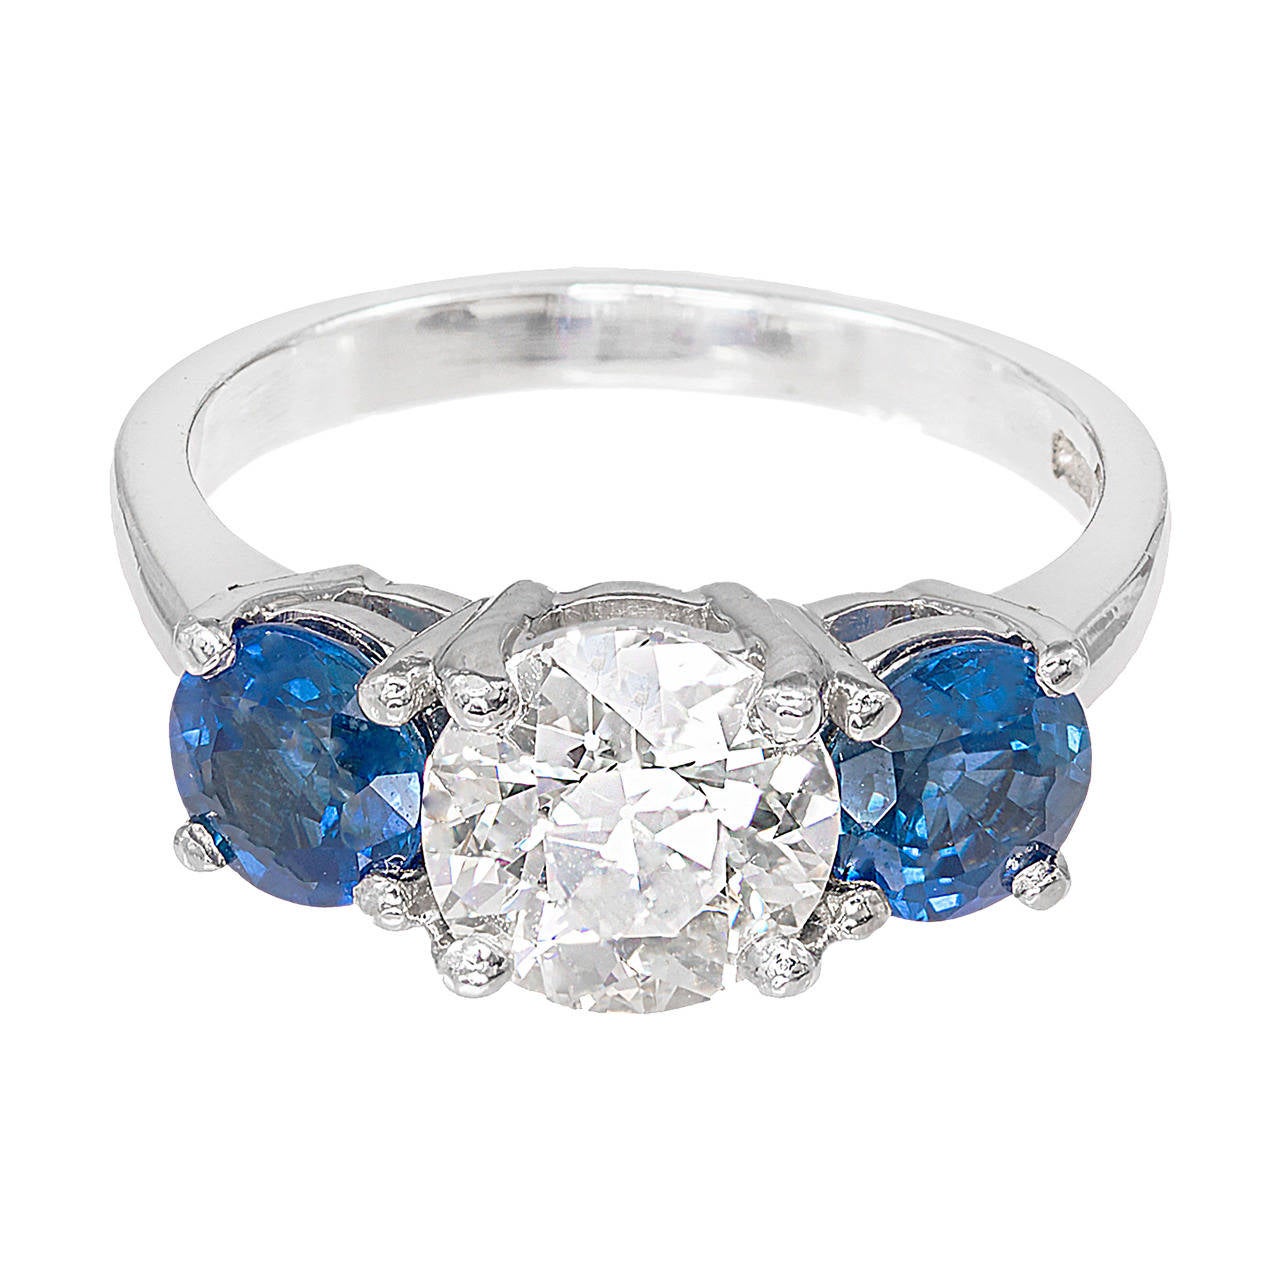 Three-stone diamond and sapphire engagement ring. European cut diamond of exceptional color and sparkle. Exceptional brilliance, raised crown and small table. Large diameter setting. The platinum setting is designed in the Peter Suchy Workshop to